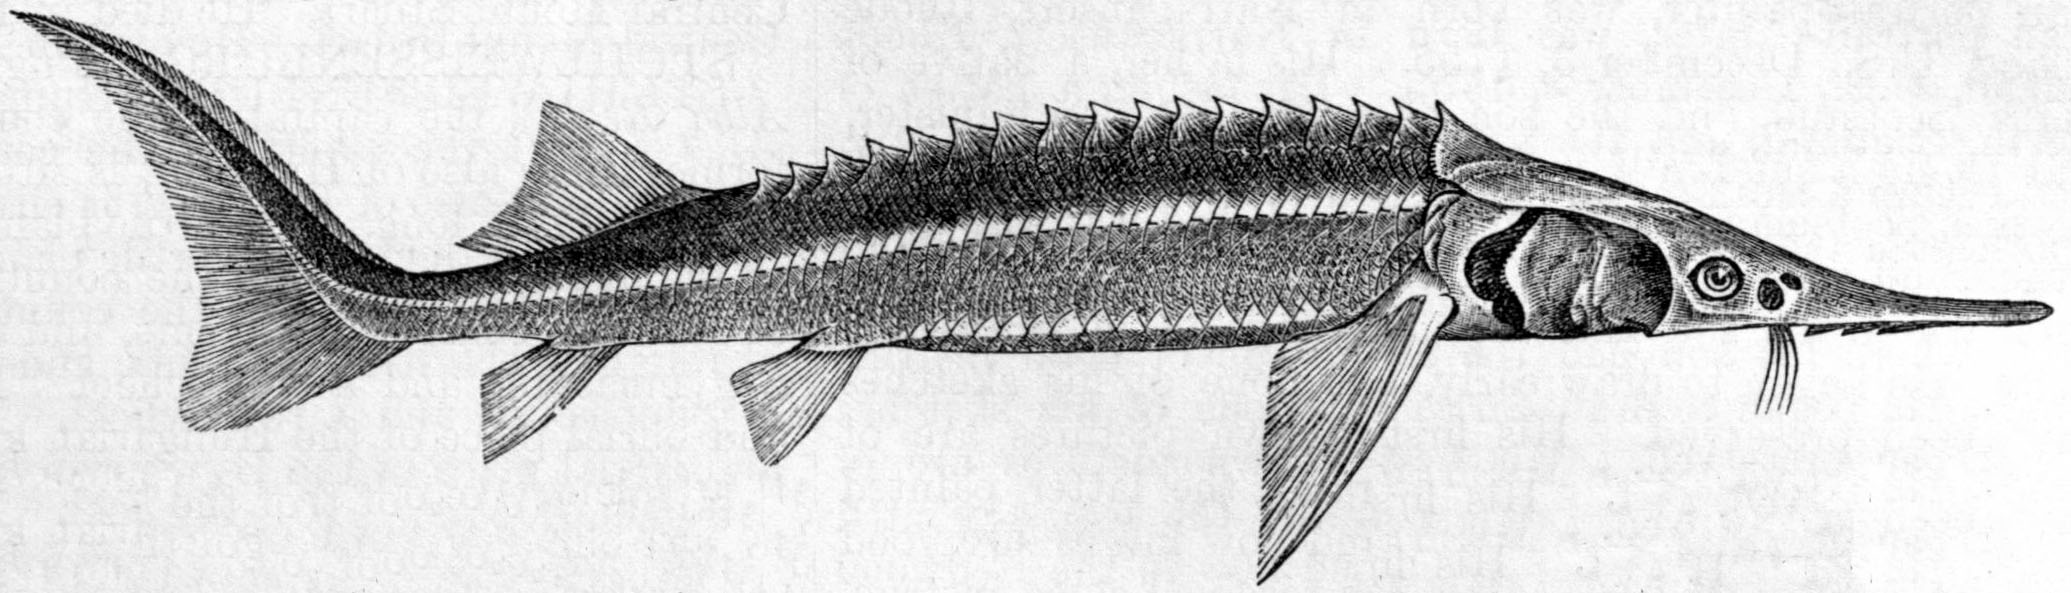 Sturgeon Drawing at Explore collection of Sturgeon